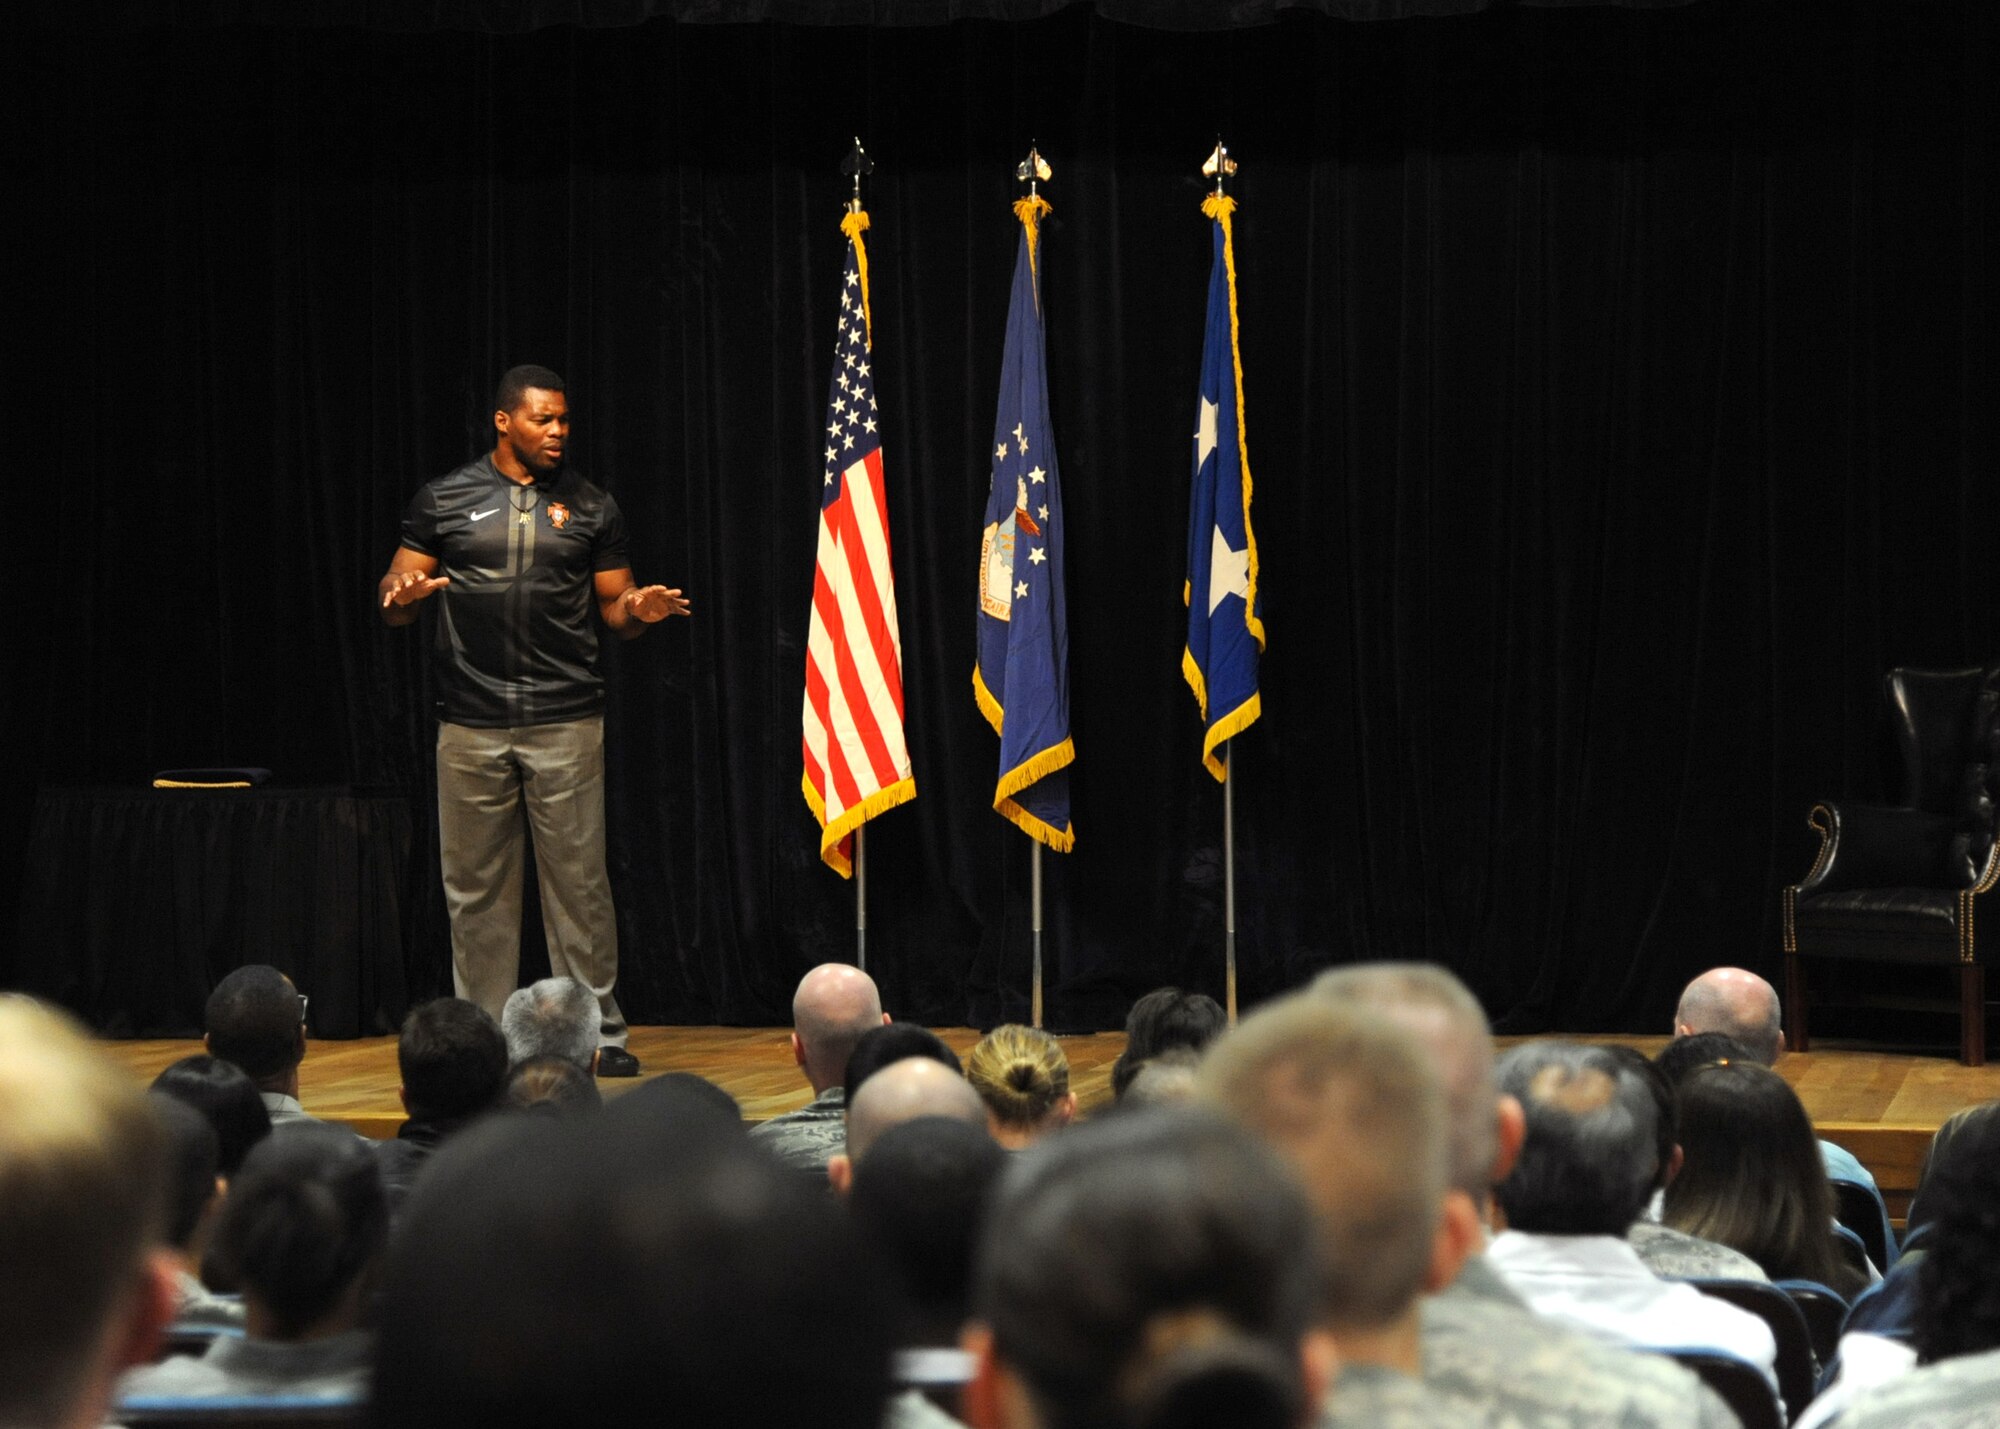 Herschel Walker speaks to more than 200 personnel from the 59th Medical Wing at the Wilford Hall Ambulatory Surgical Center, Oct. 23, 2013, at Joint Base San Antonio-Lackland, Texas. As part of the Department of Defense Patriot Support Program’s Anti-stigma campaign, Walker visits military installations across the country to encourage service members to seek help for mental health and substance abuse issues. (U.S. Air Force photo/Staff Sgt. Jerilyn Quintanilla) 